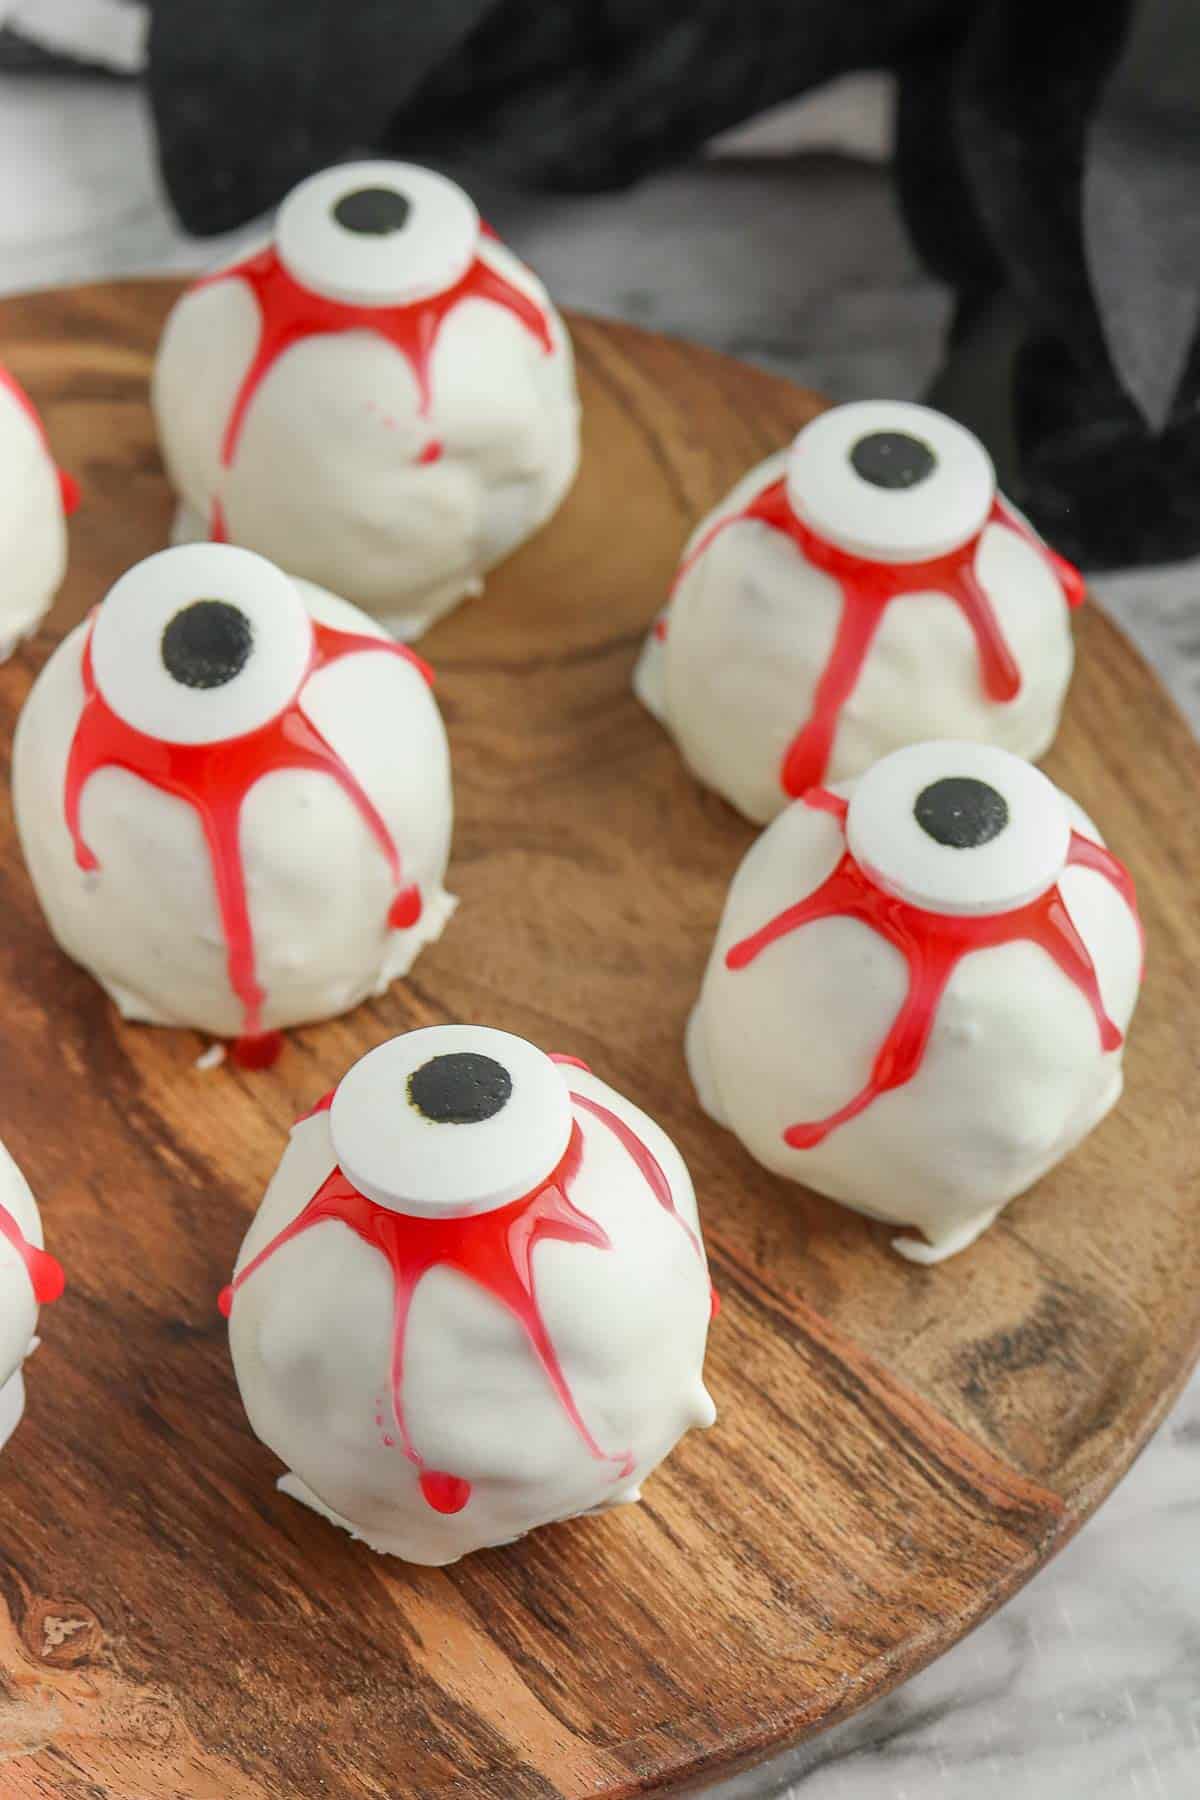 A plate of white and red oreo eyeballs on a wood board.